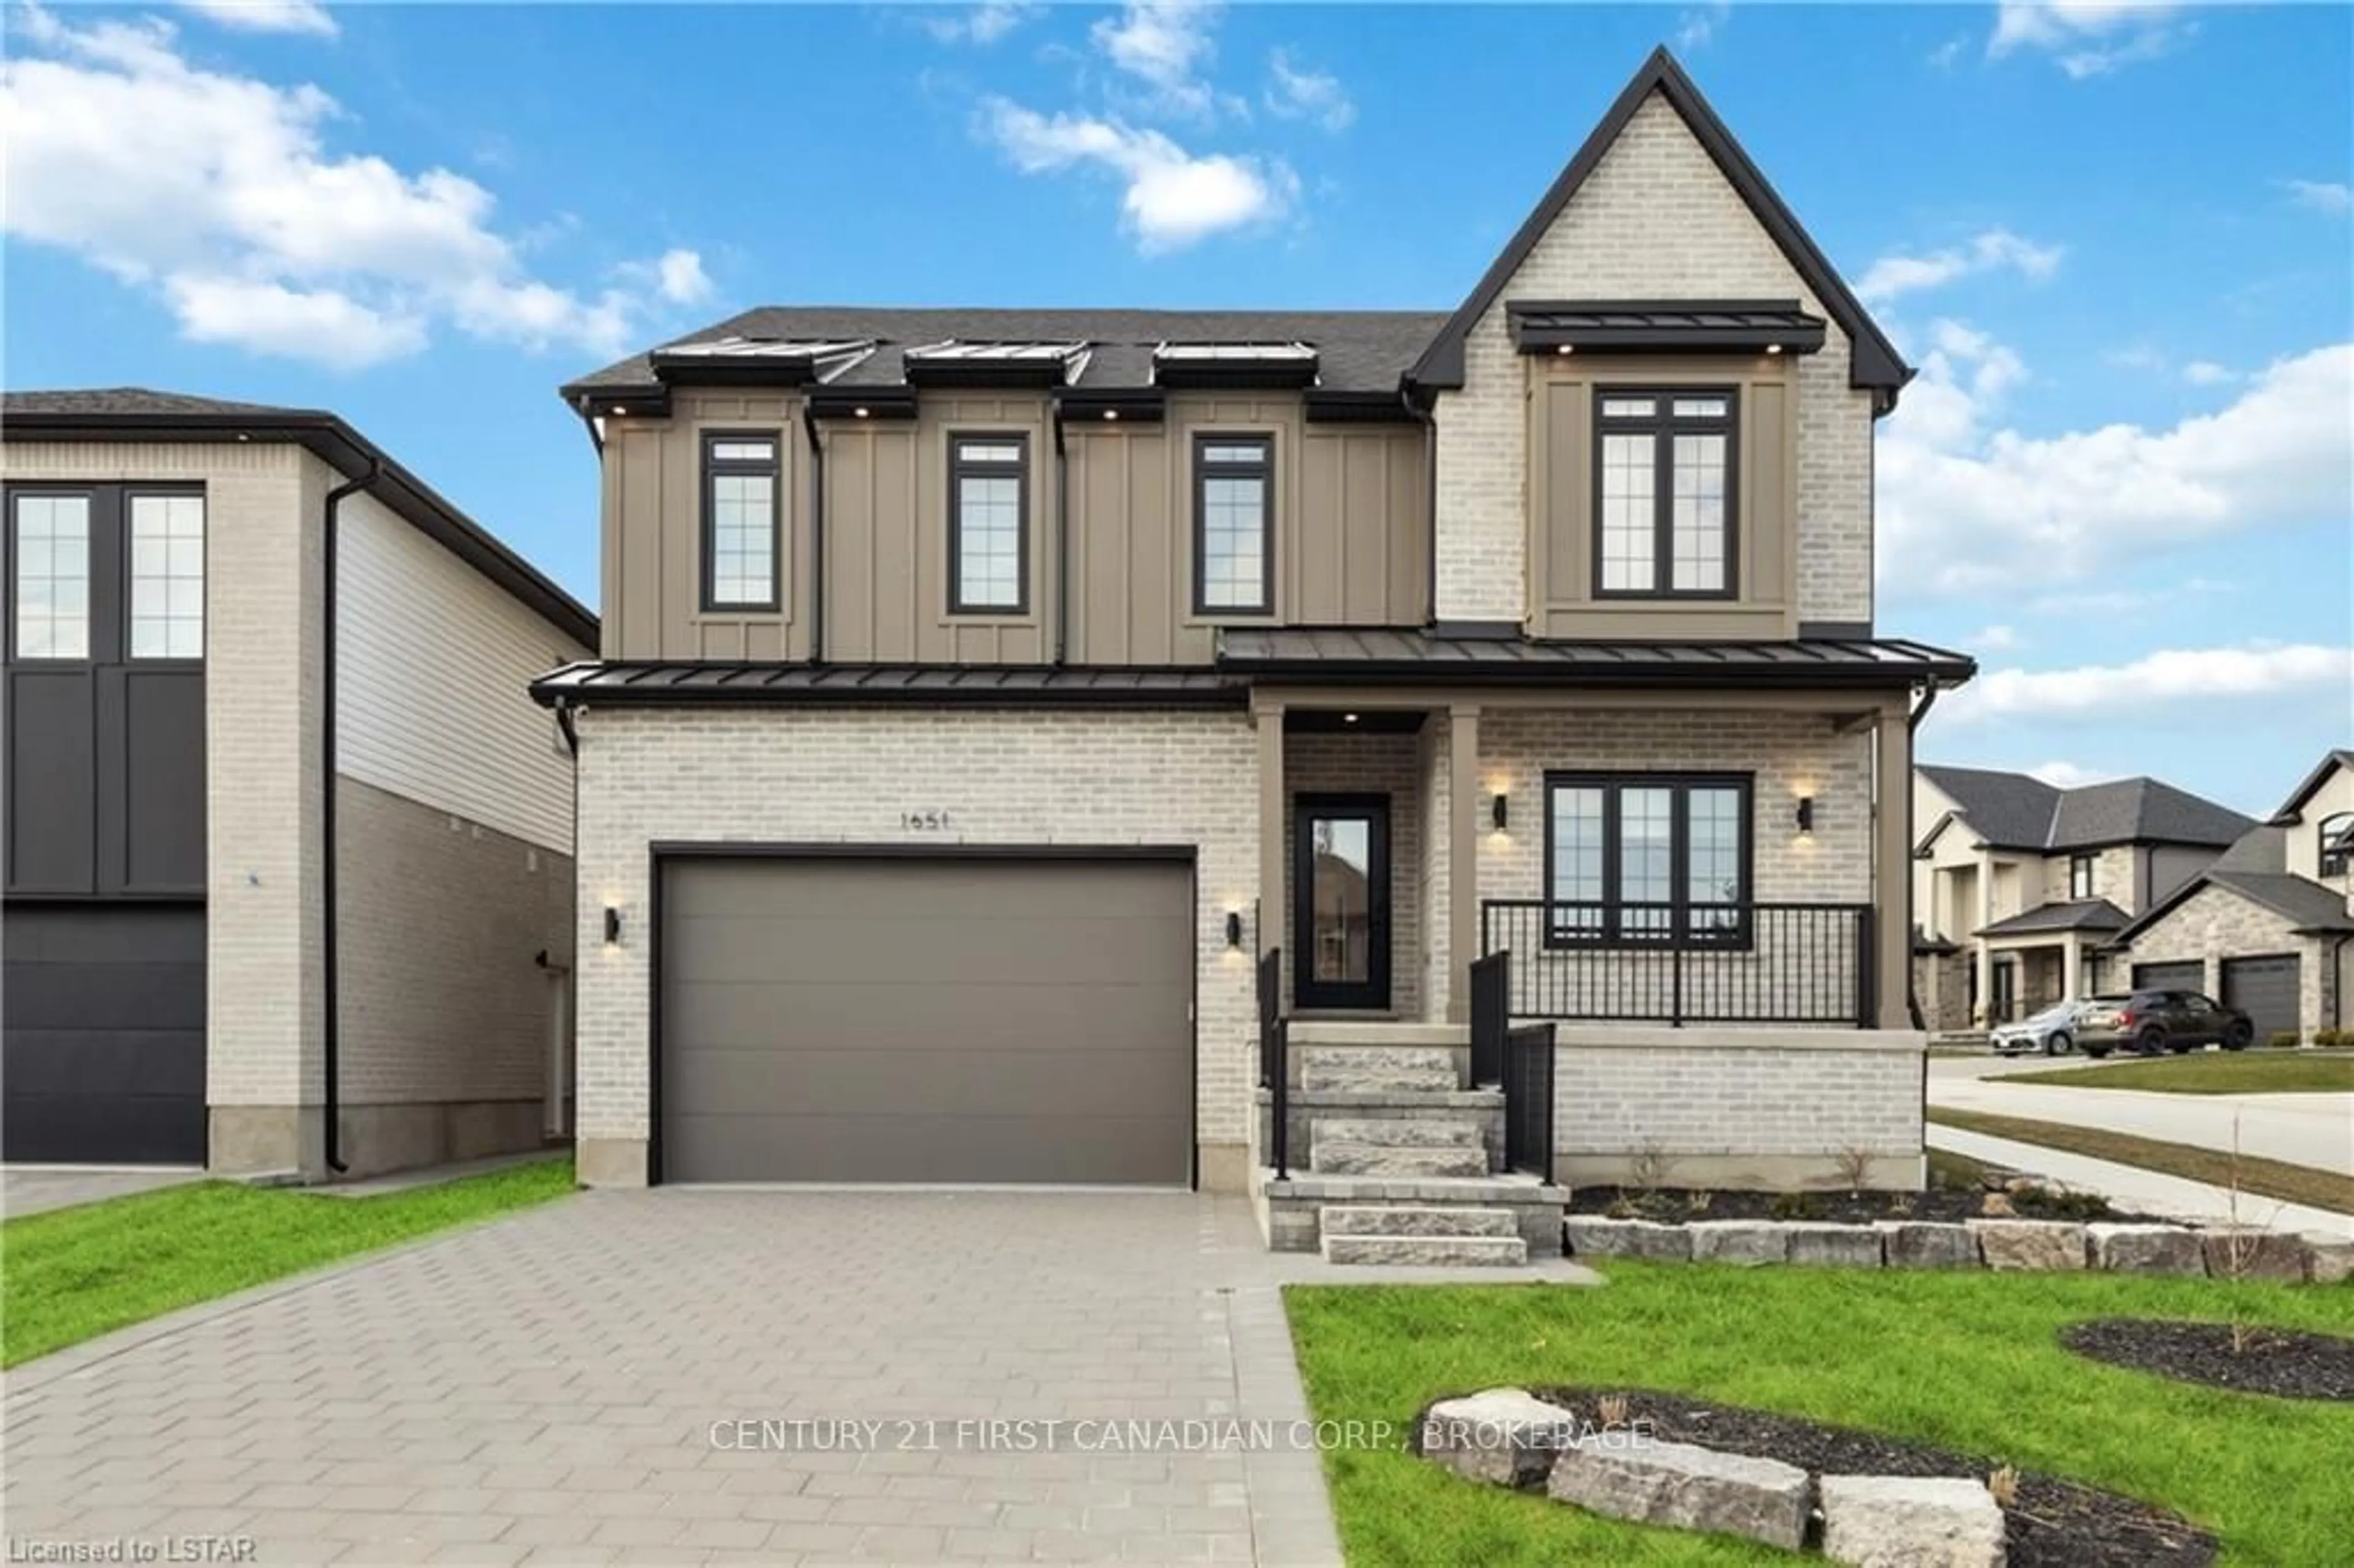 Frontside or backside of a home for 1651 Upper West Avenue Ave, London Ontario N6K 4P9